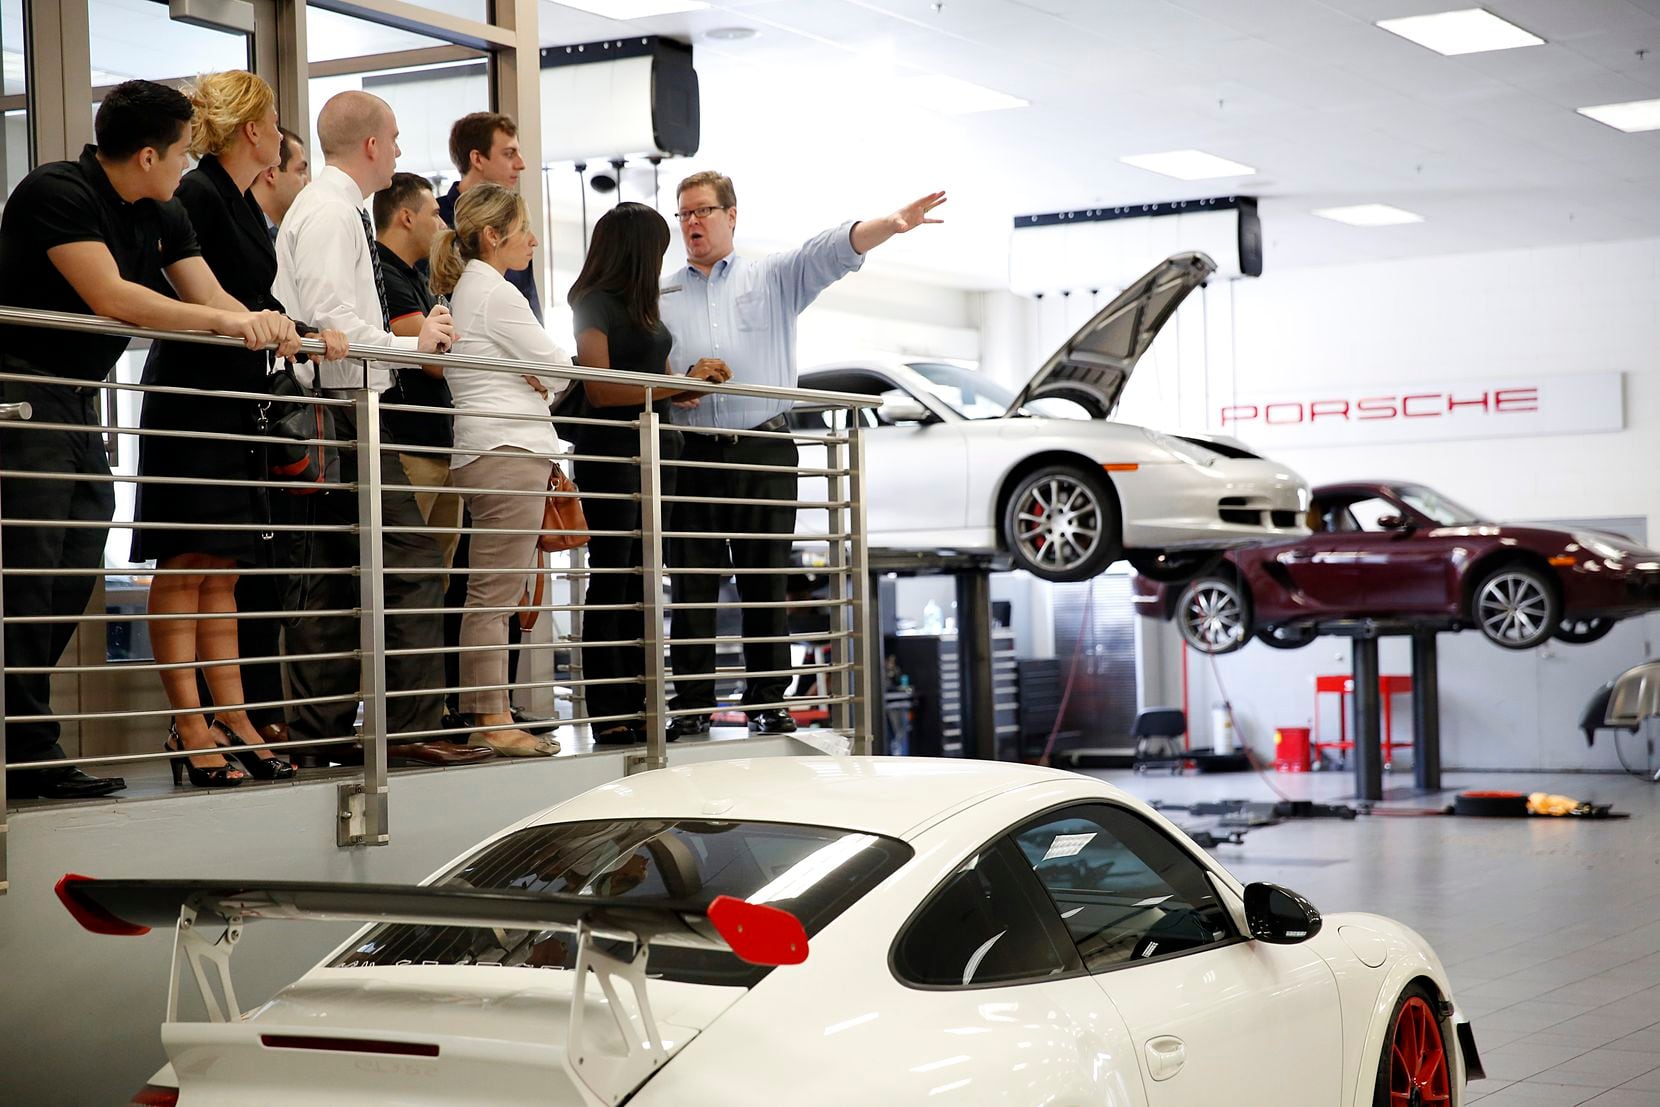 Park Place Dealerships Founder Ken Schnitzer To Sell All But Two Dealerships For 1 Billion